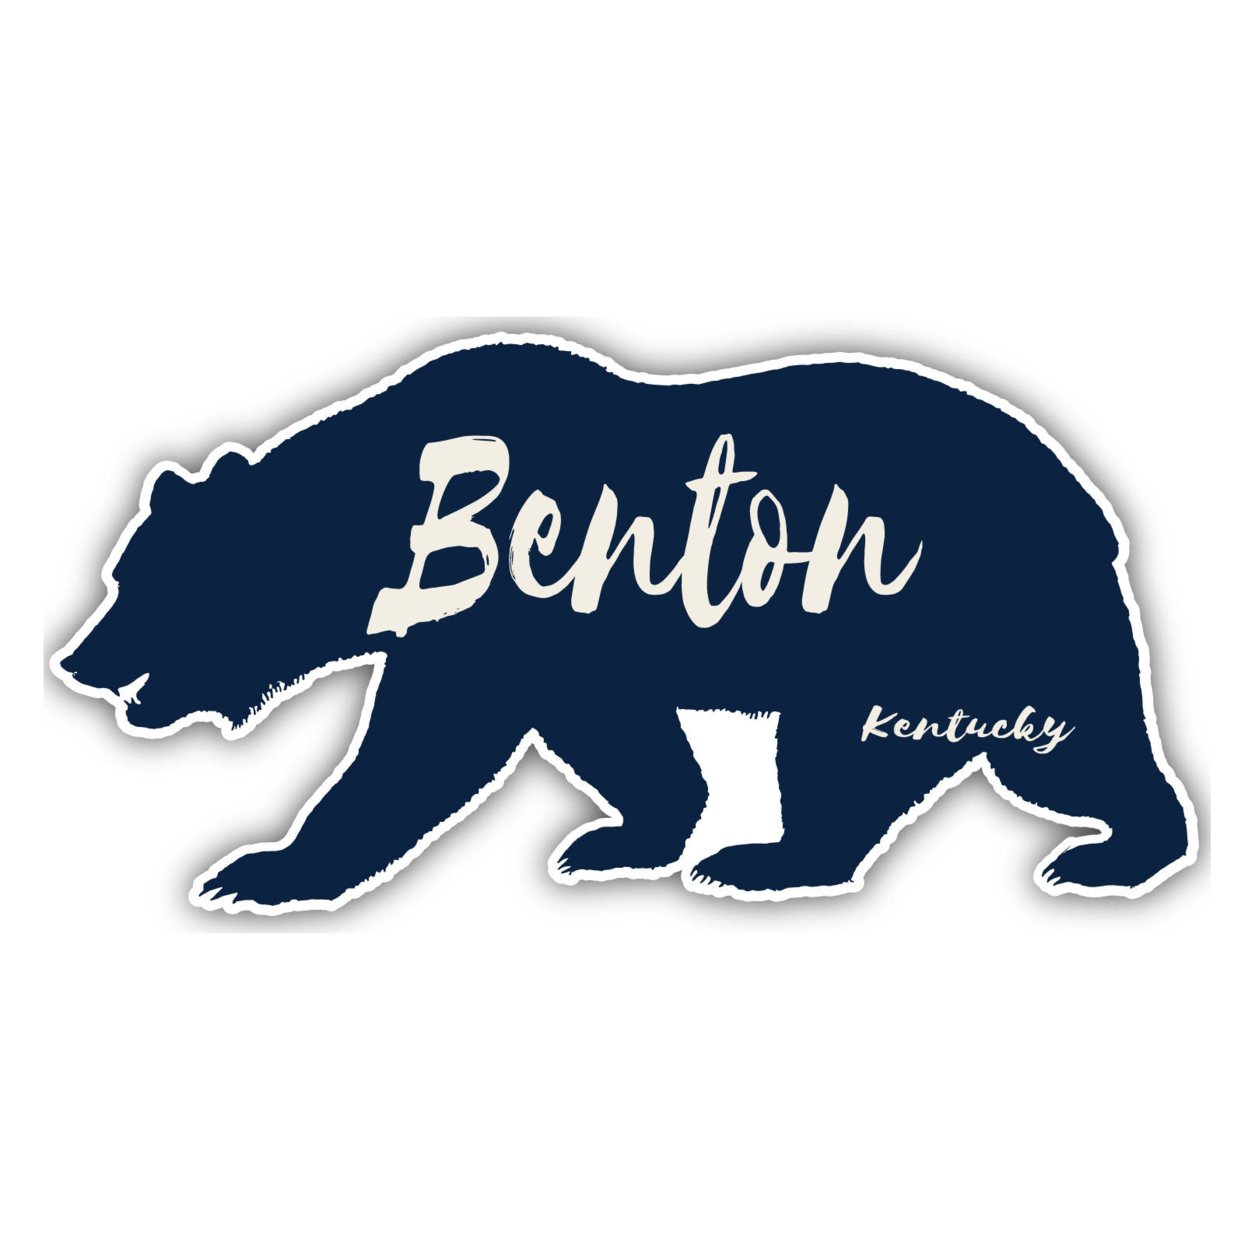 Benton Kentucky Souvenir Decorative Stickers (Choose Theme And Size) - 4-Pack, 10-Inch, Great Outdoors